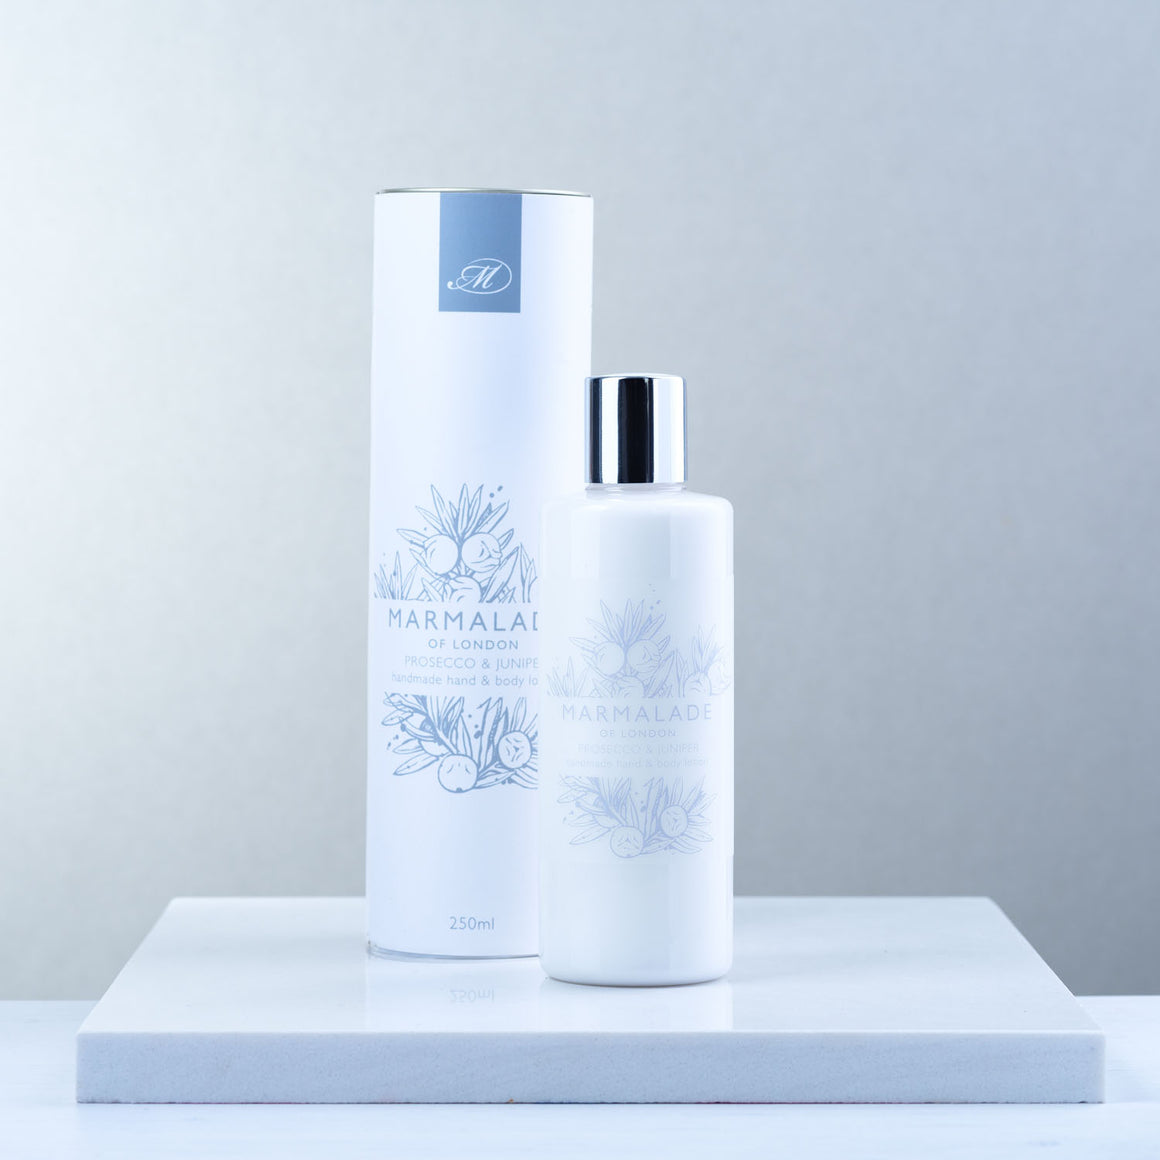 Marmalade of London Prosecco & Juniper Hand & Body Lotion with white packaging and light blue text